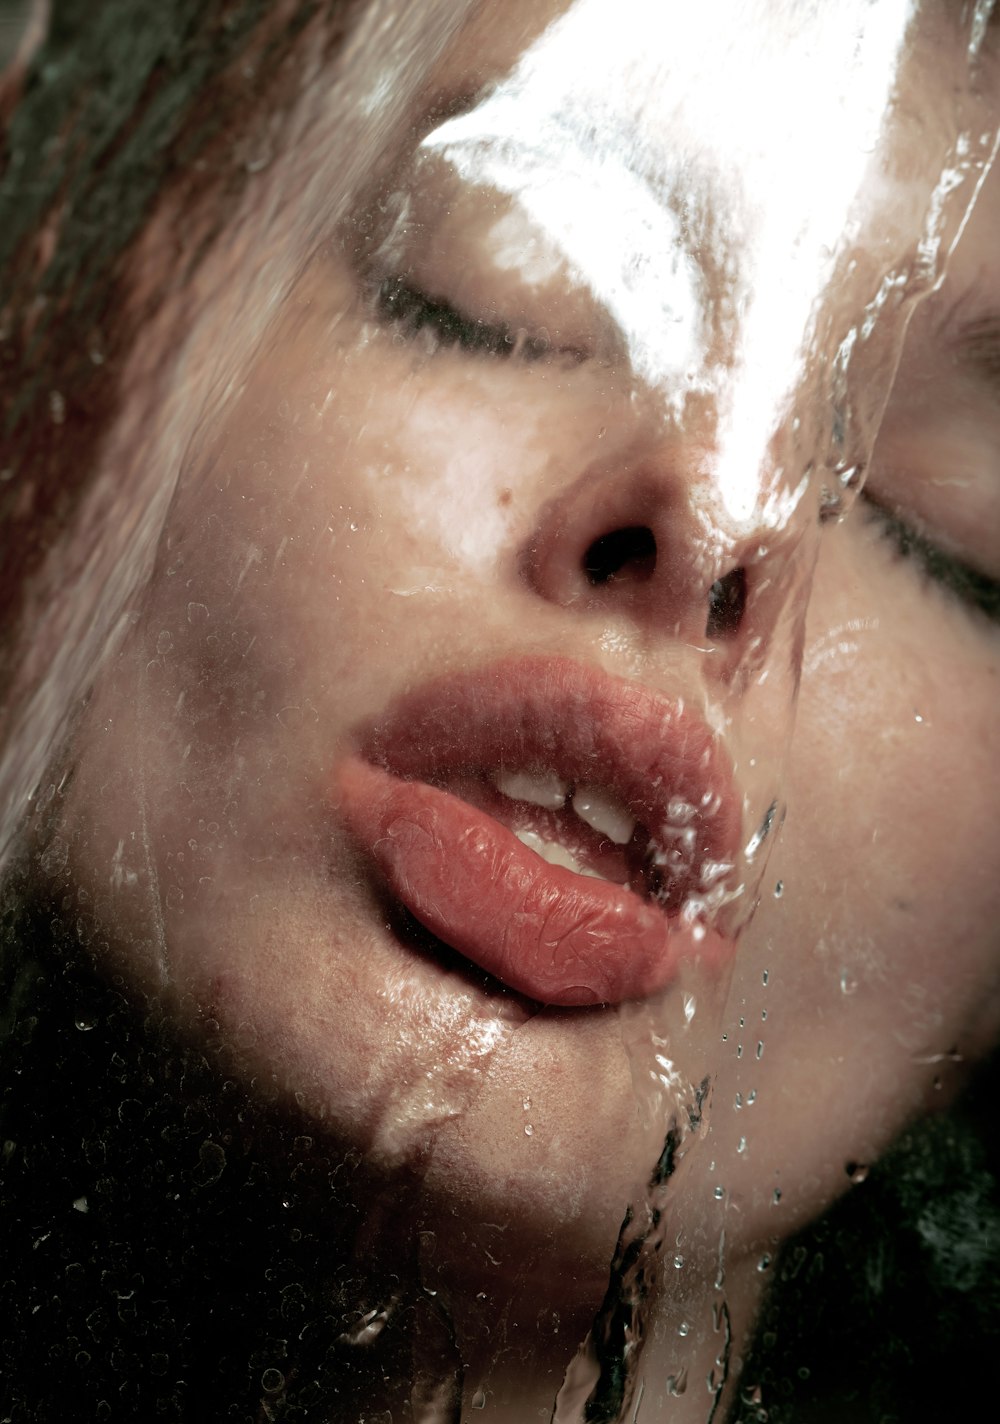 a close up of a woman's face under a shower of water